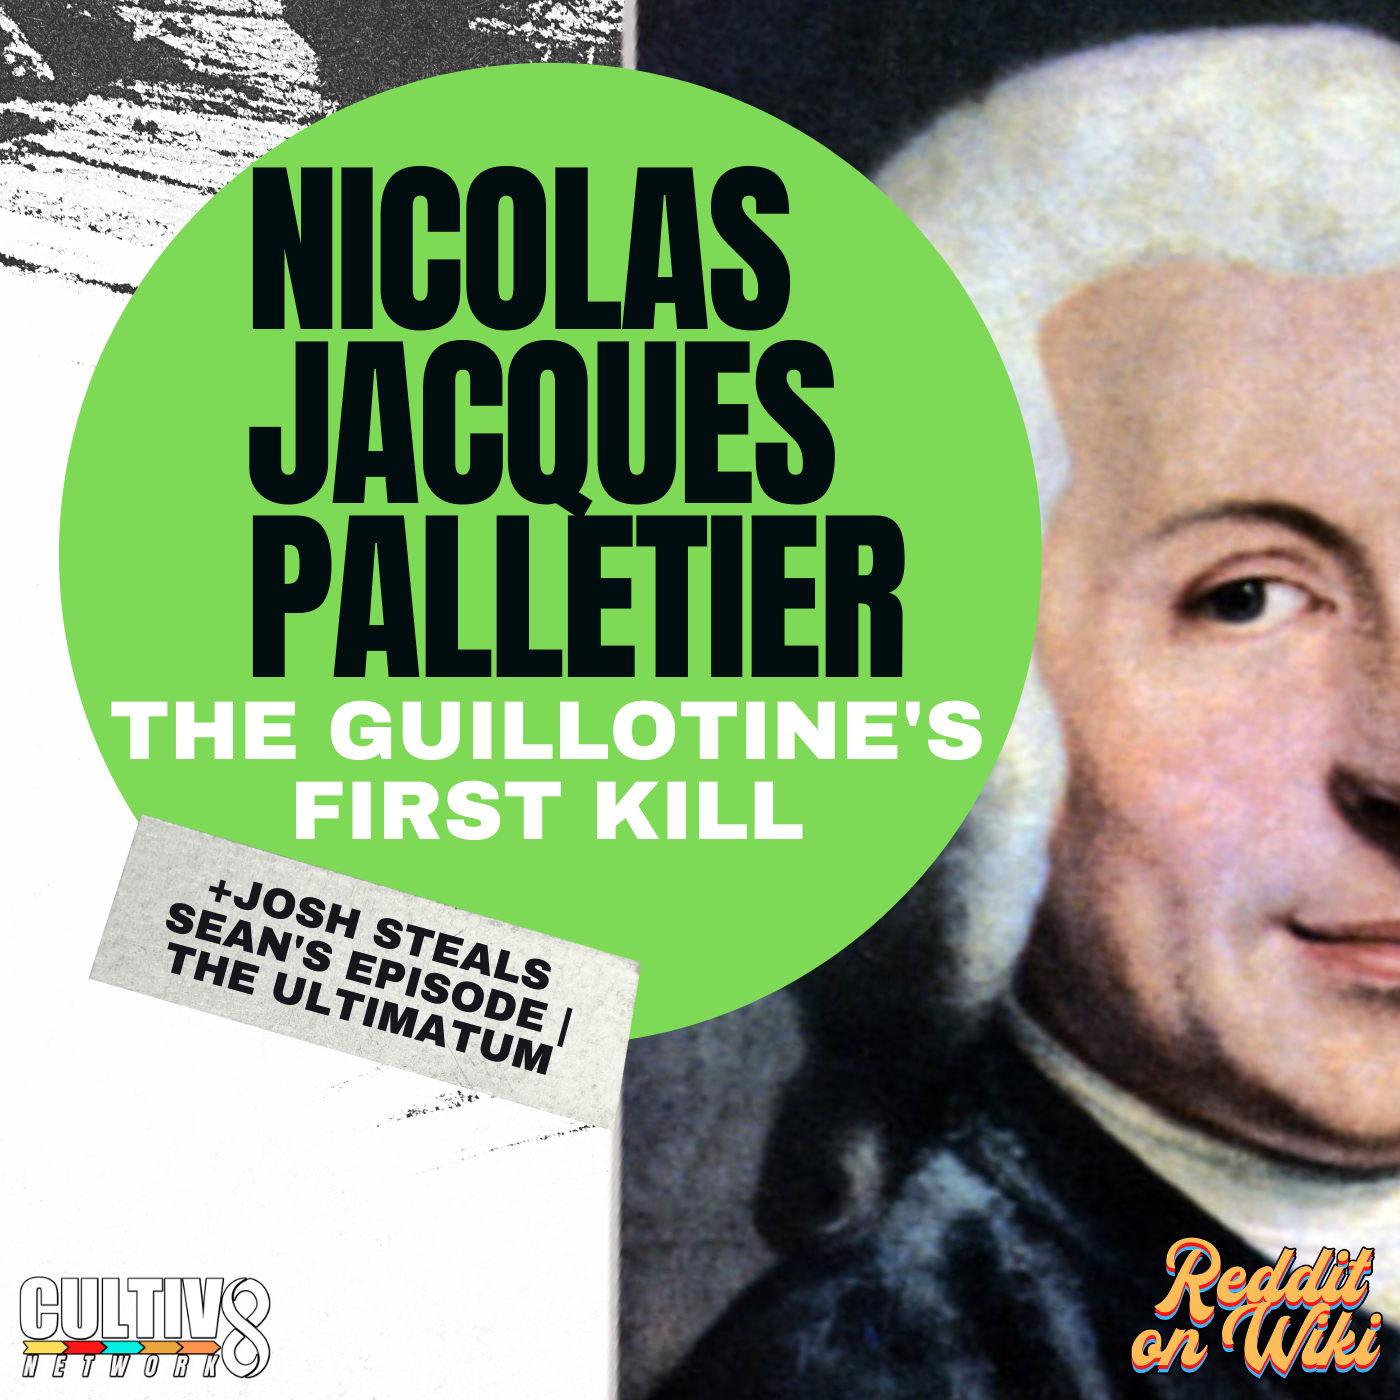 Nicolas Jacques Palletier | The Guillotine’s First Kill